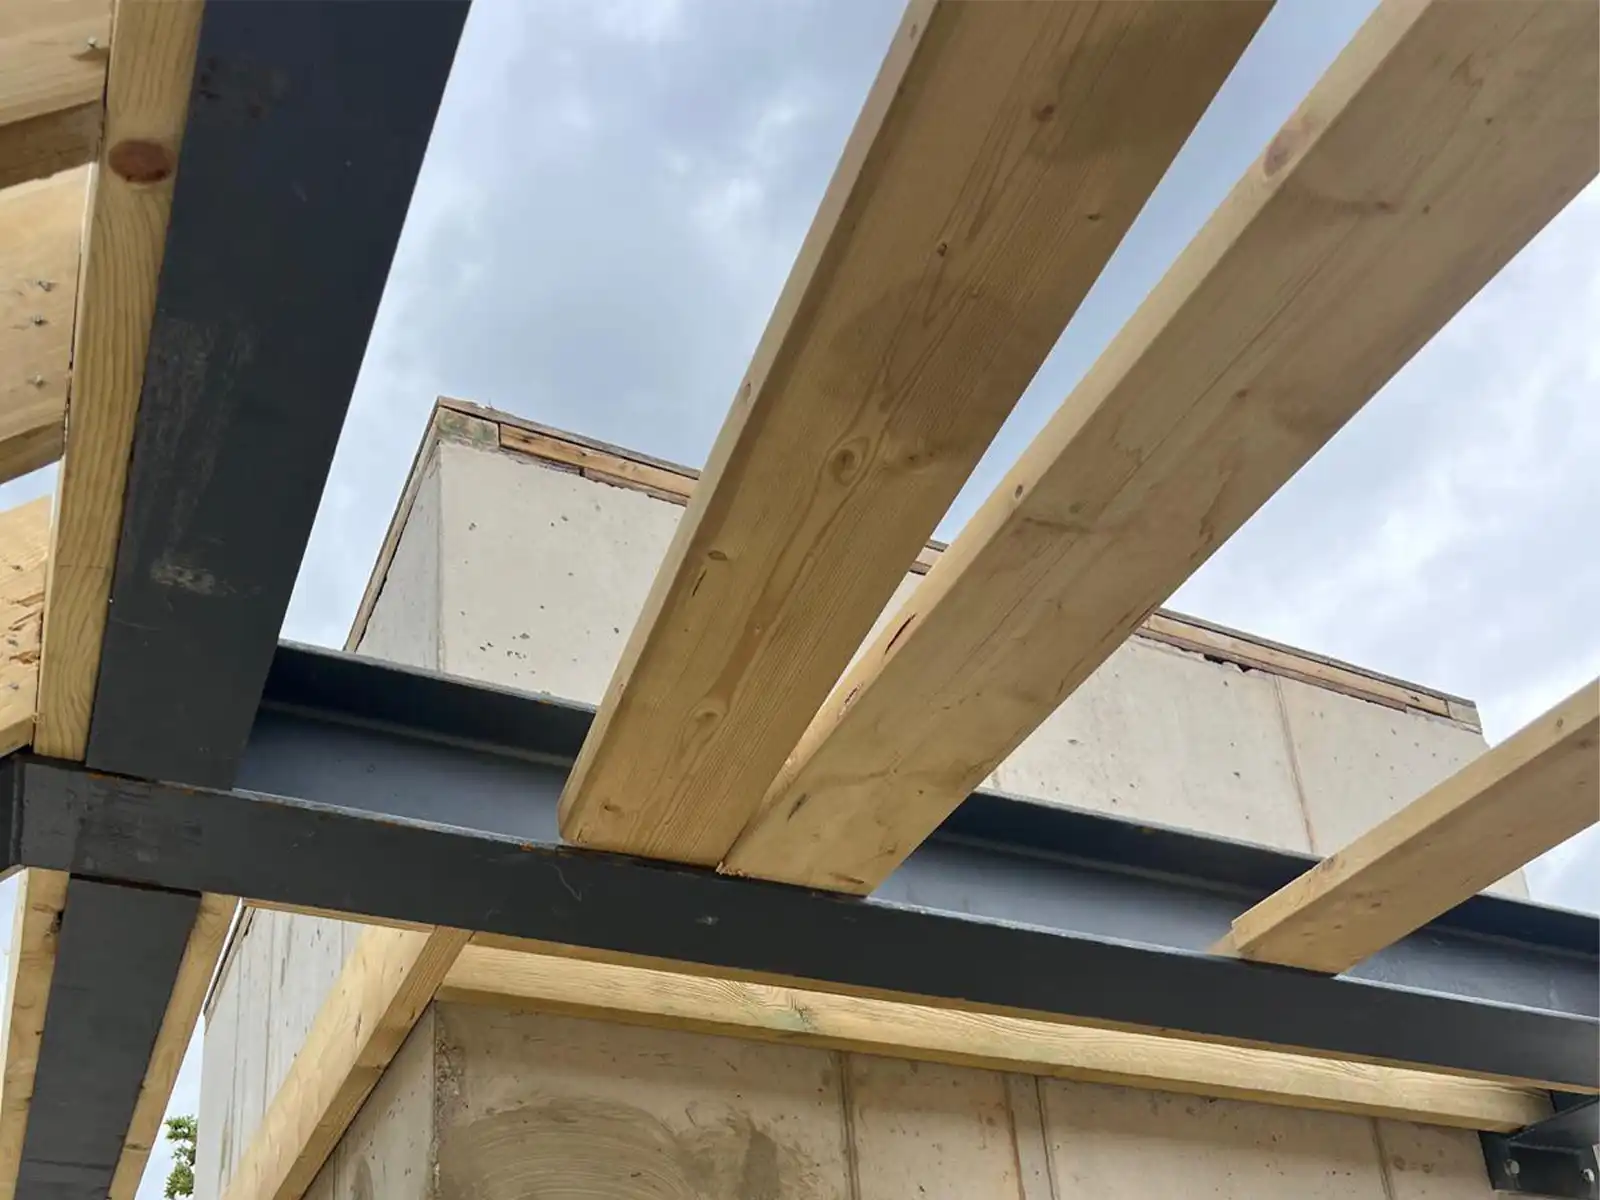 Structural Engineer overseeing implementation of RC Frame with RSJ crank Steels on construction site, ensuring precise and efficient structural integration - following our Structural Drawings and Calculations